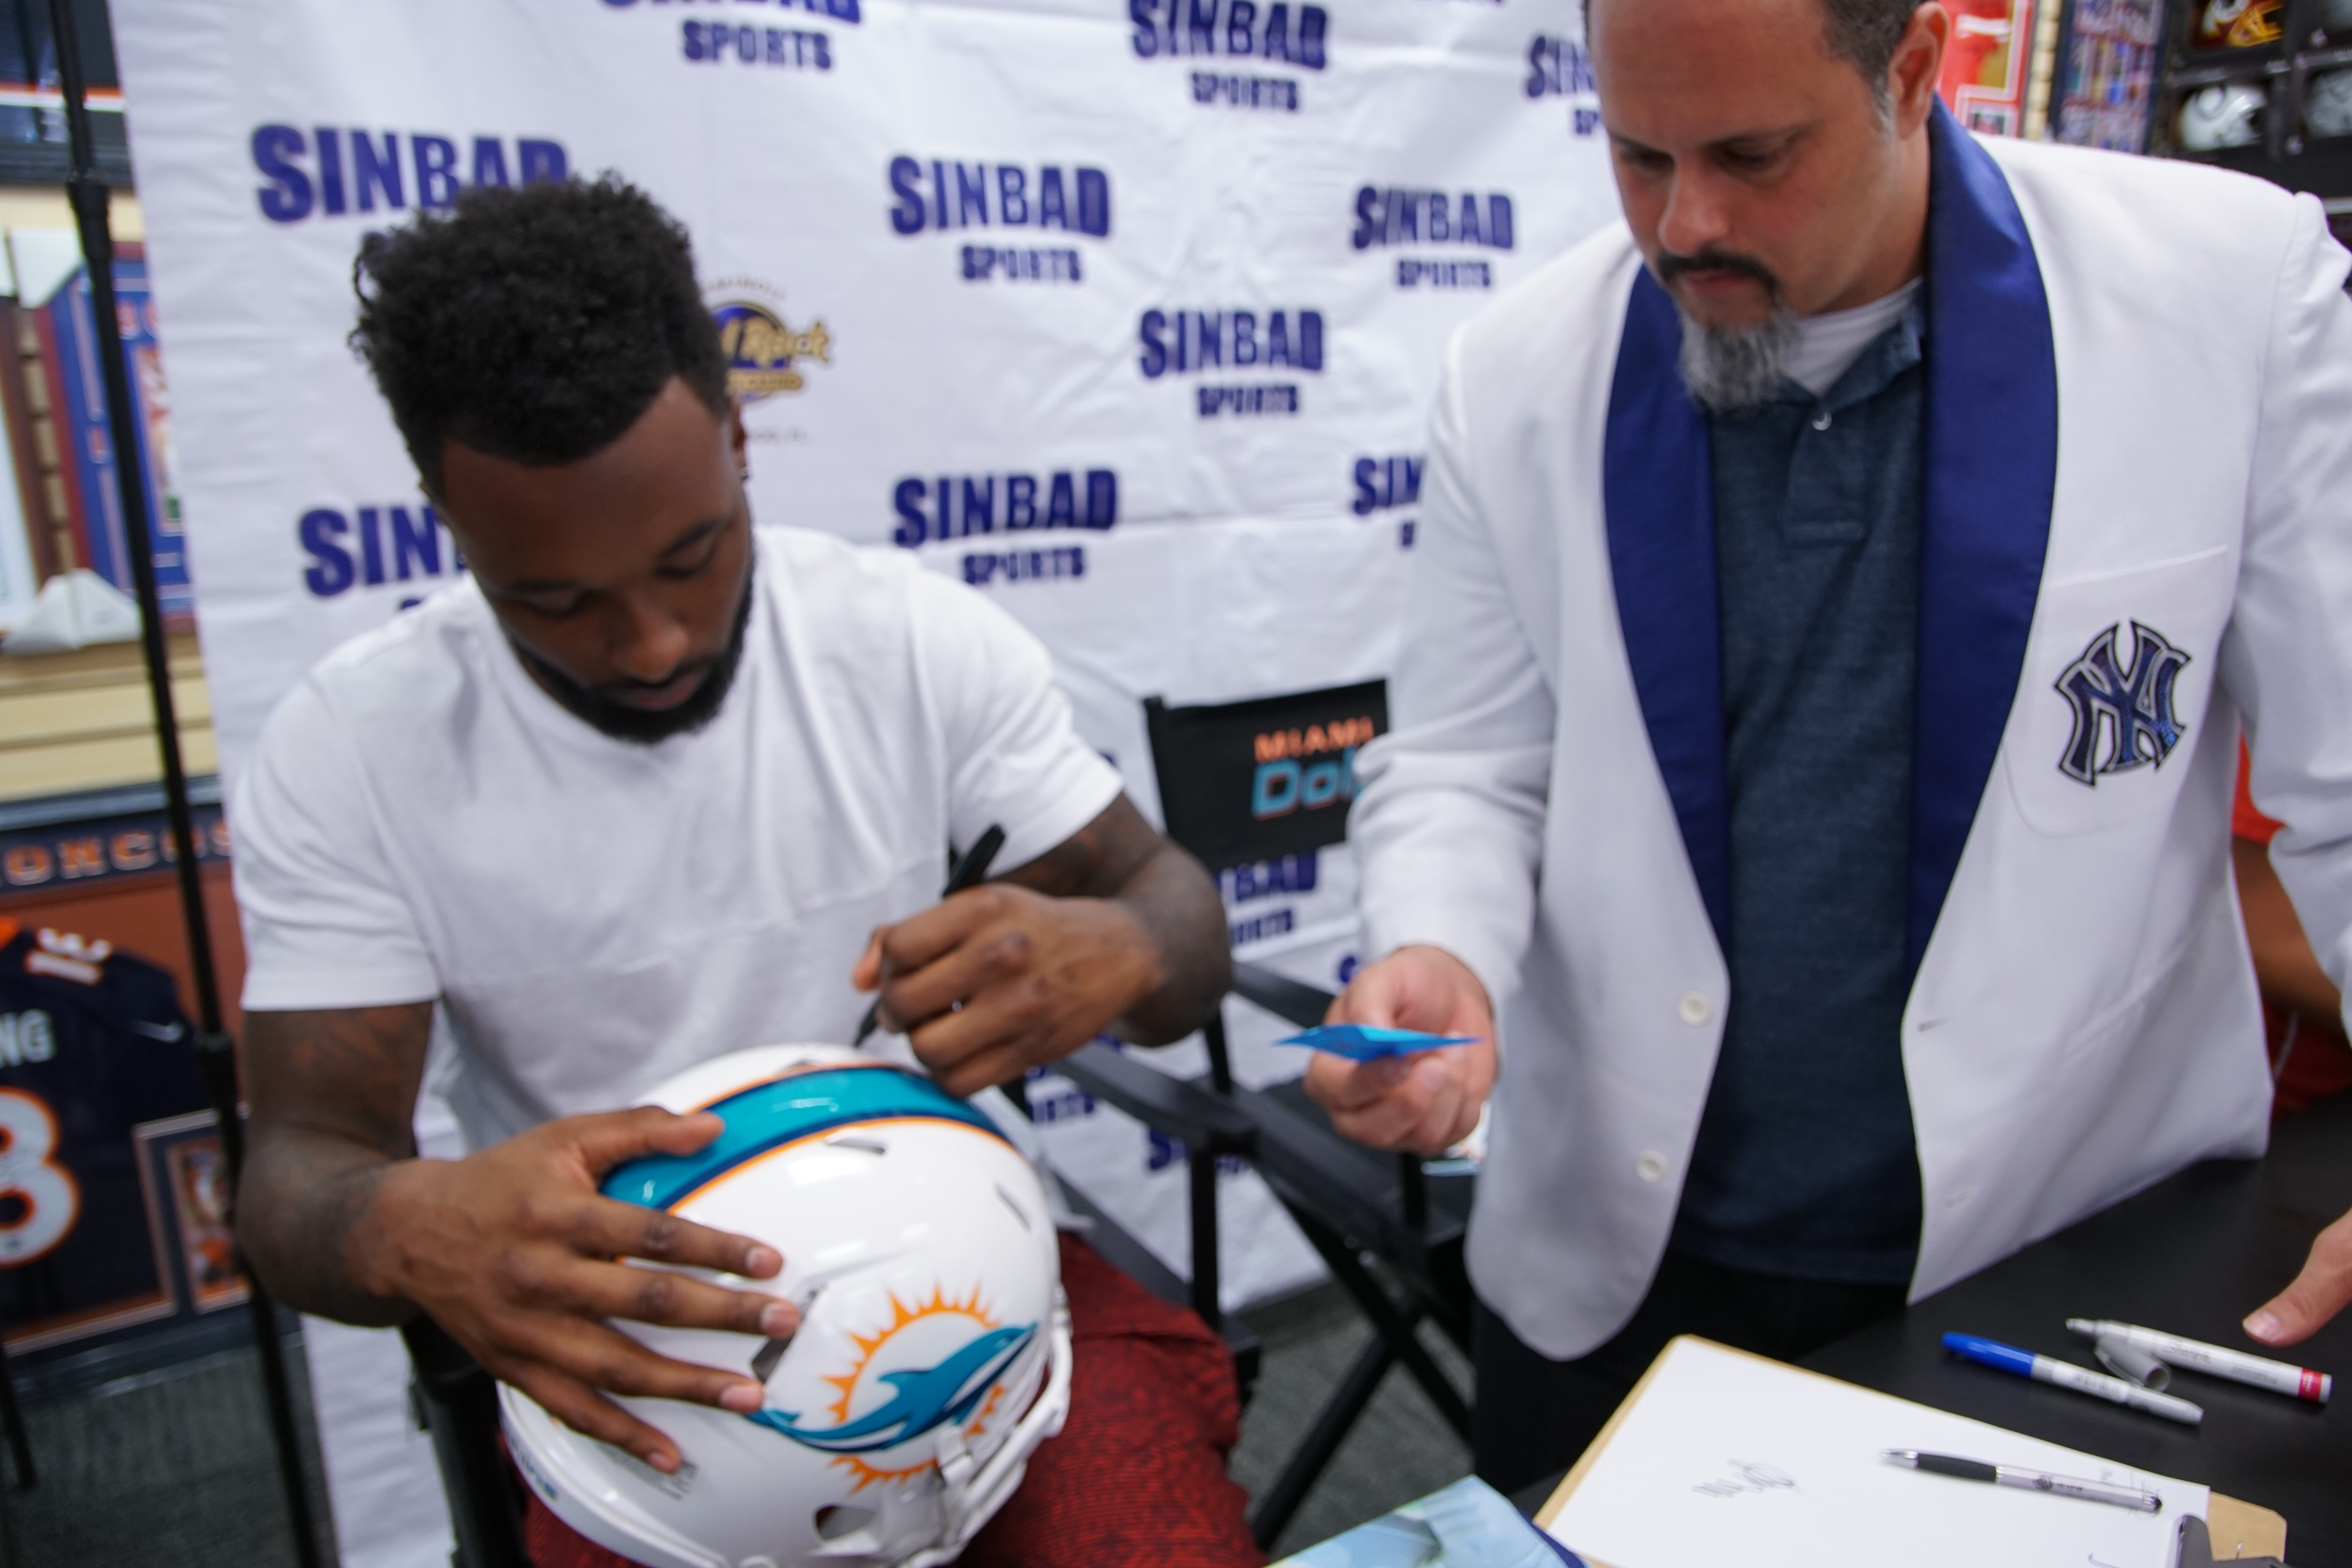 jarvis landry signing helmet for a fan at sinbad sports